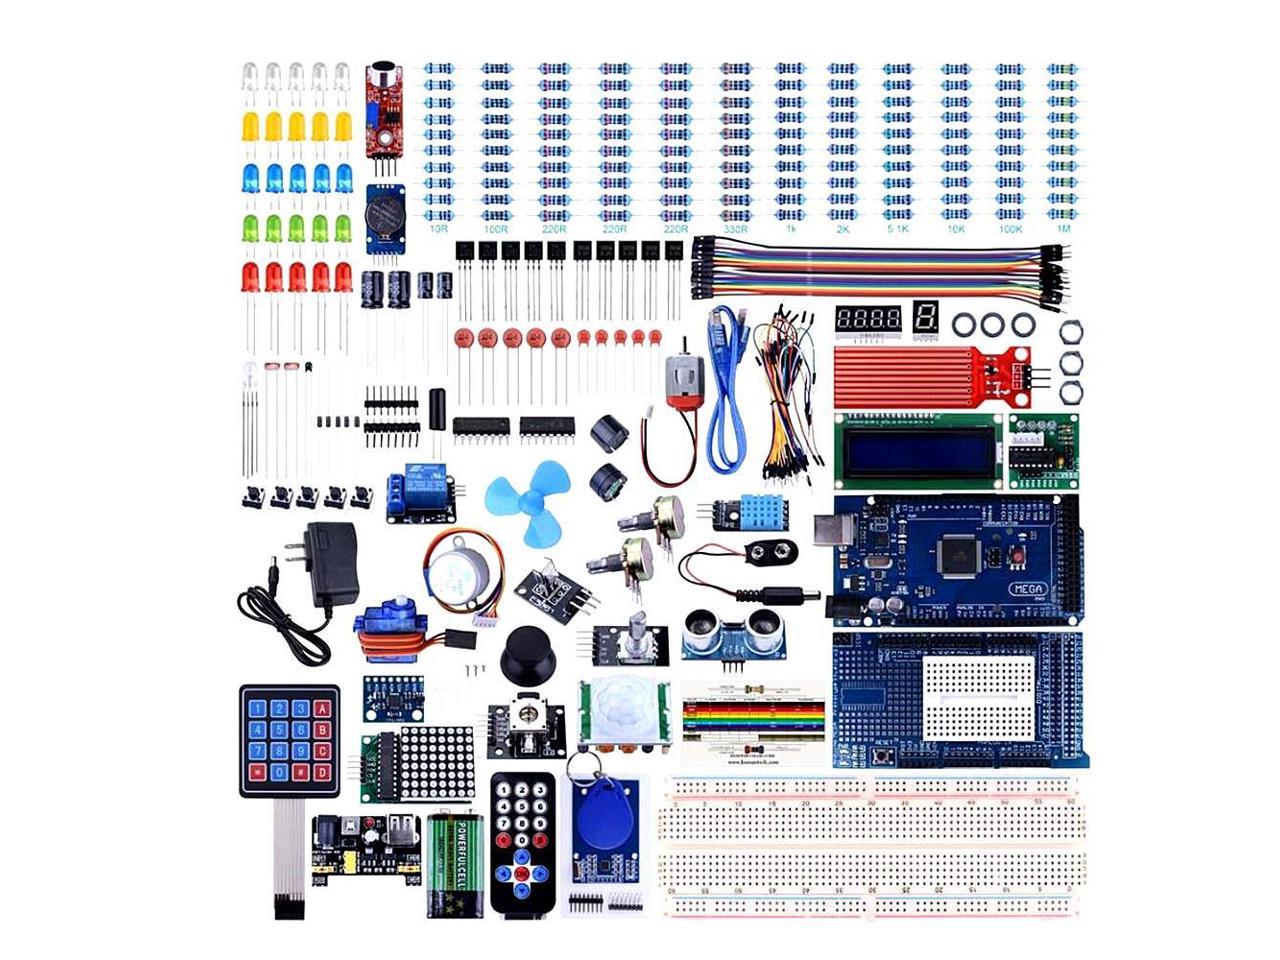 boss budget Volcano Mega2560 Kit for Arduino with Tutorials, Complete Starter Kit wholesale  with box - Newegg.com